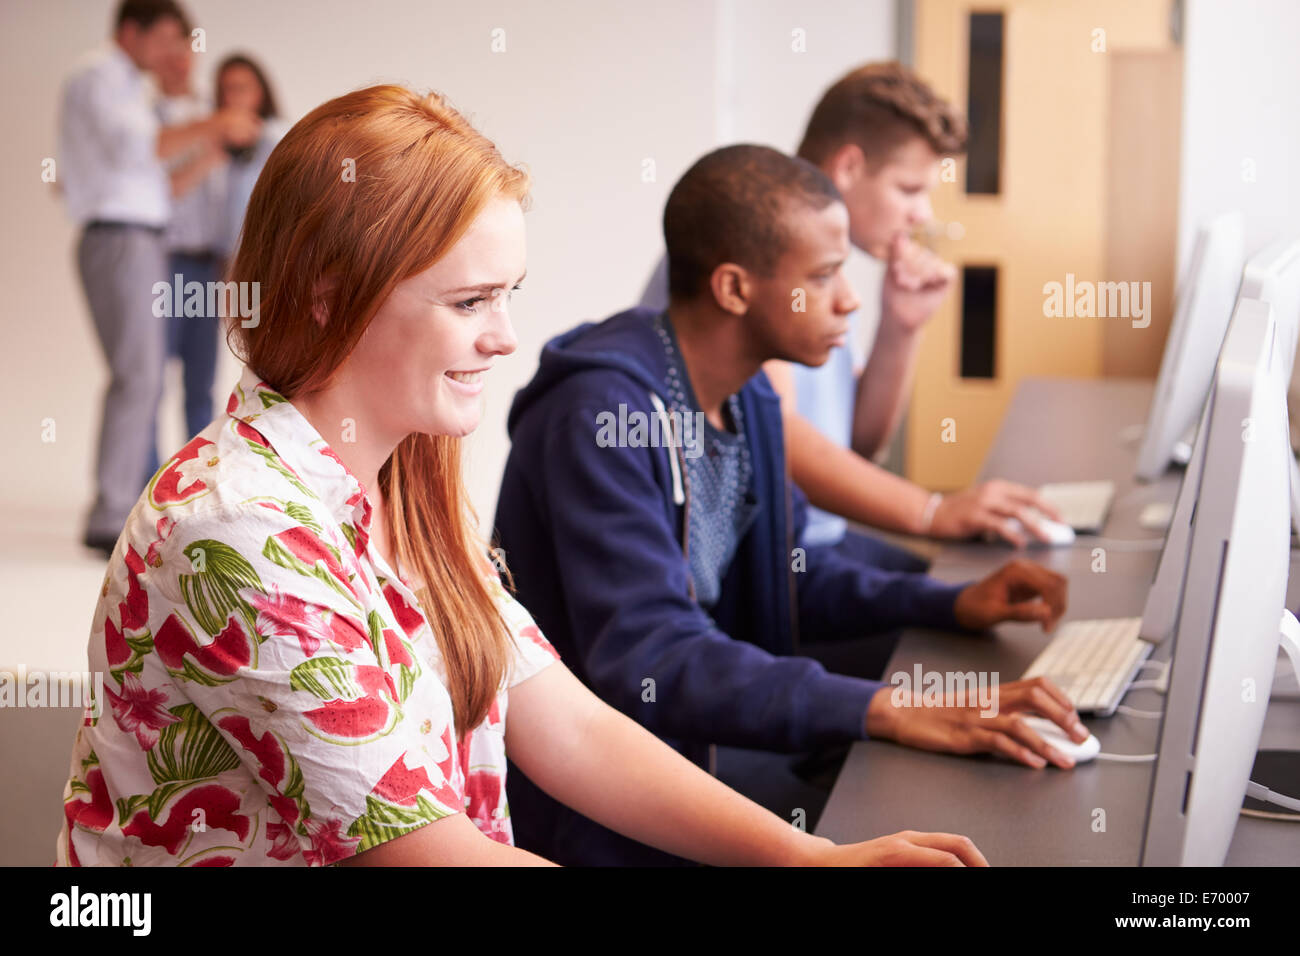 College Students Using Computers On Media Studies Course Stock Photo